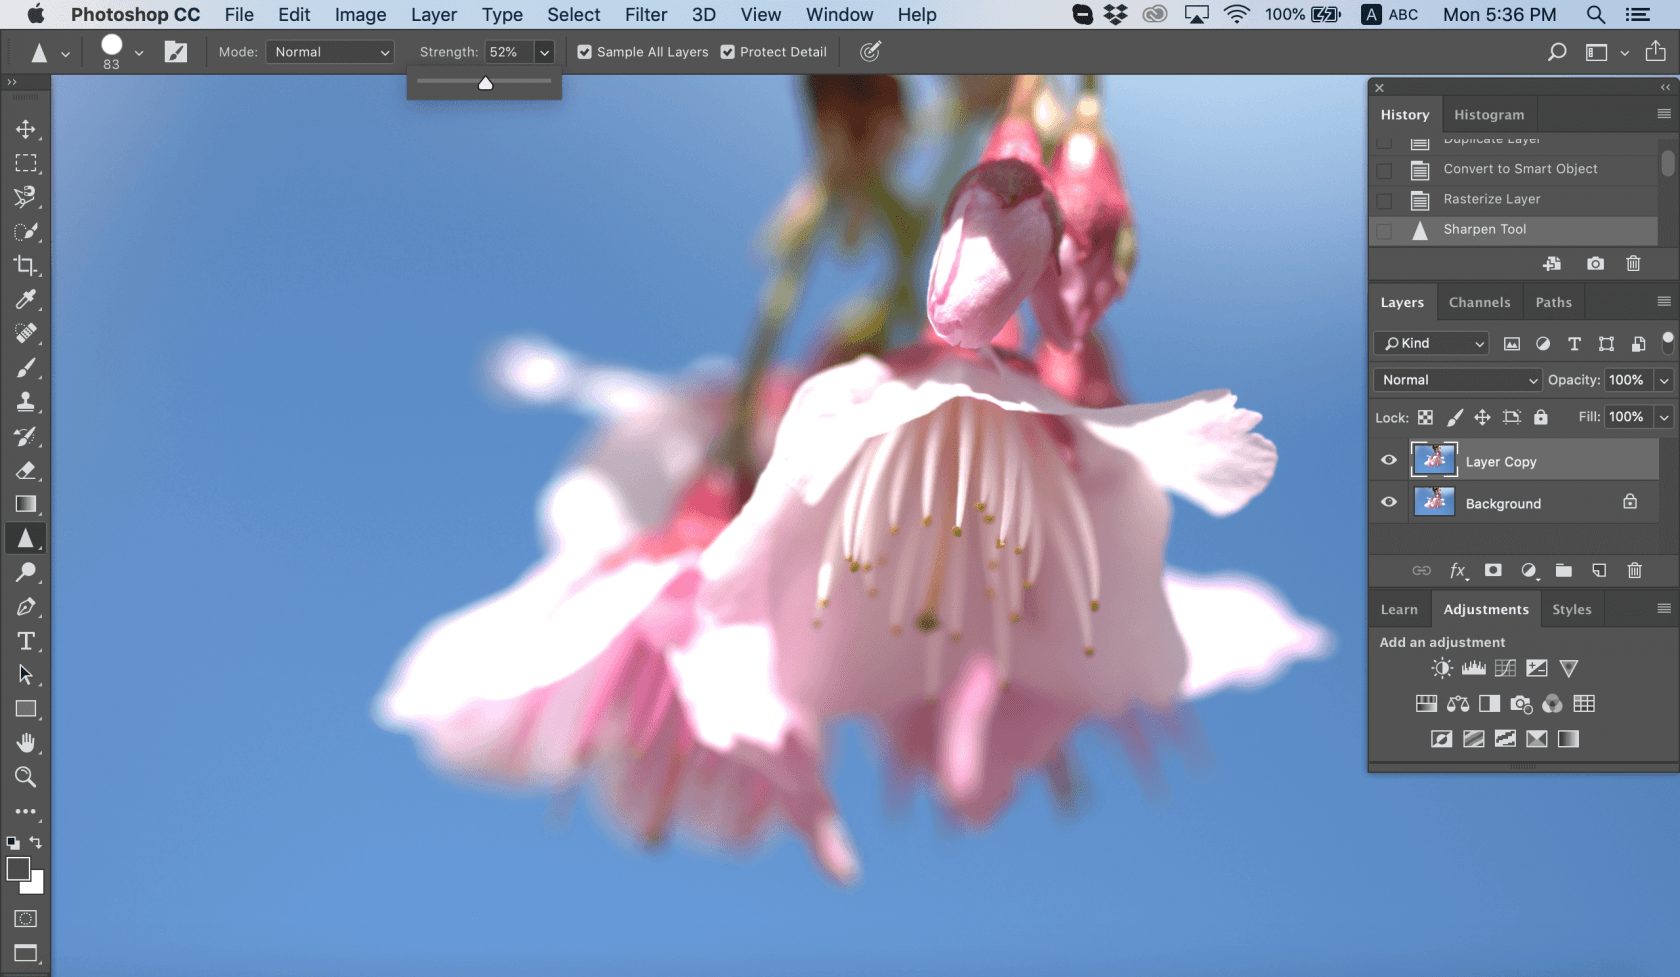 How to Deblur In Photoshop